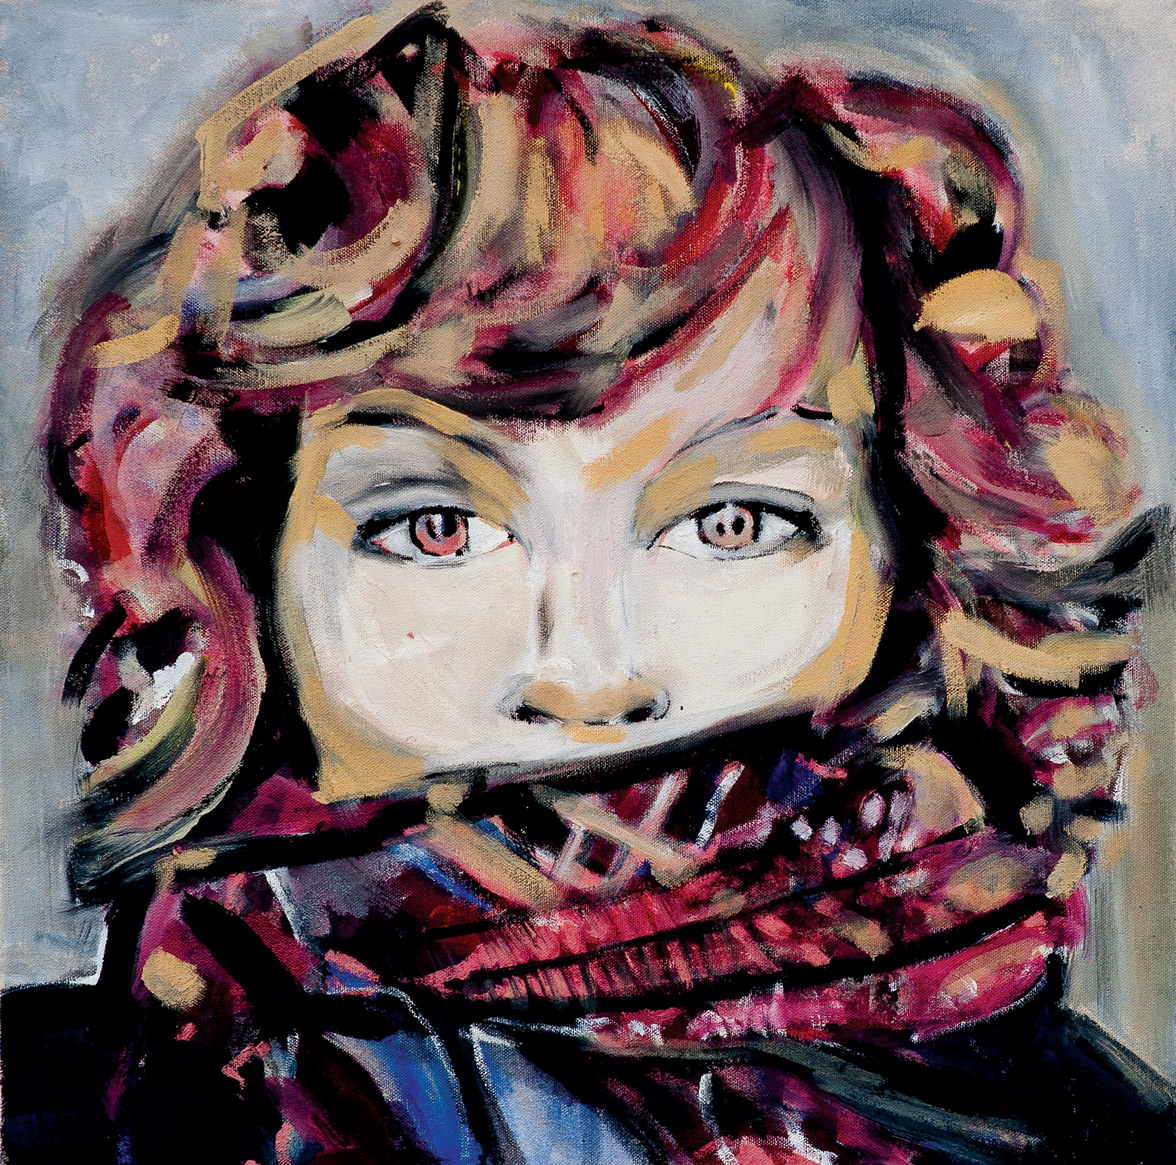 Painting of Dani Couture by Melanie Janisse-Barlow